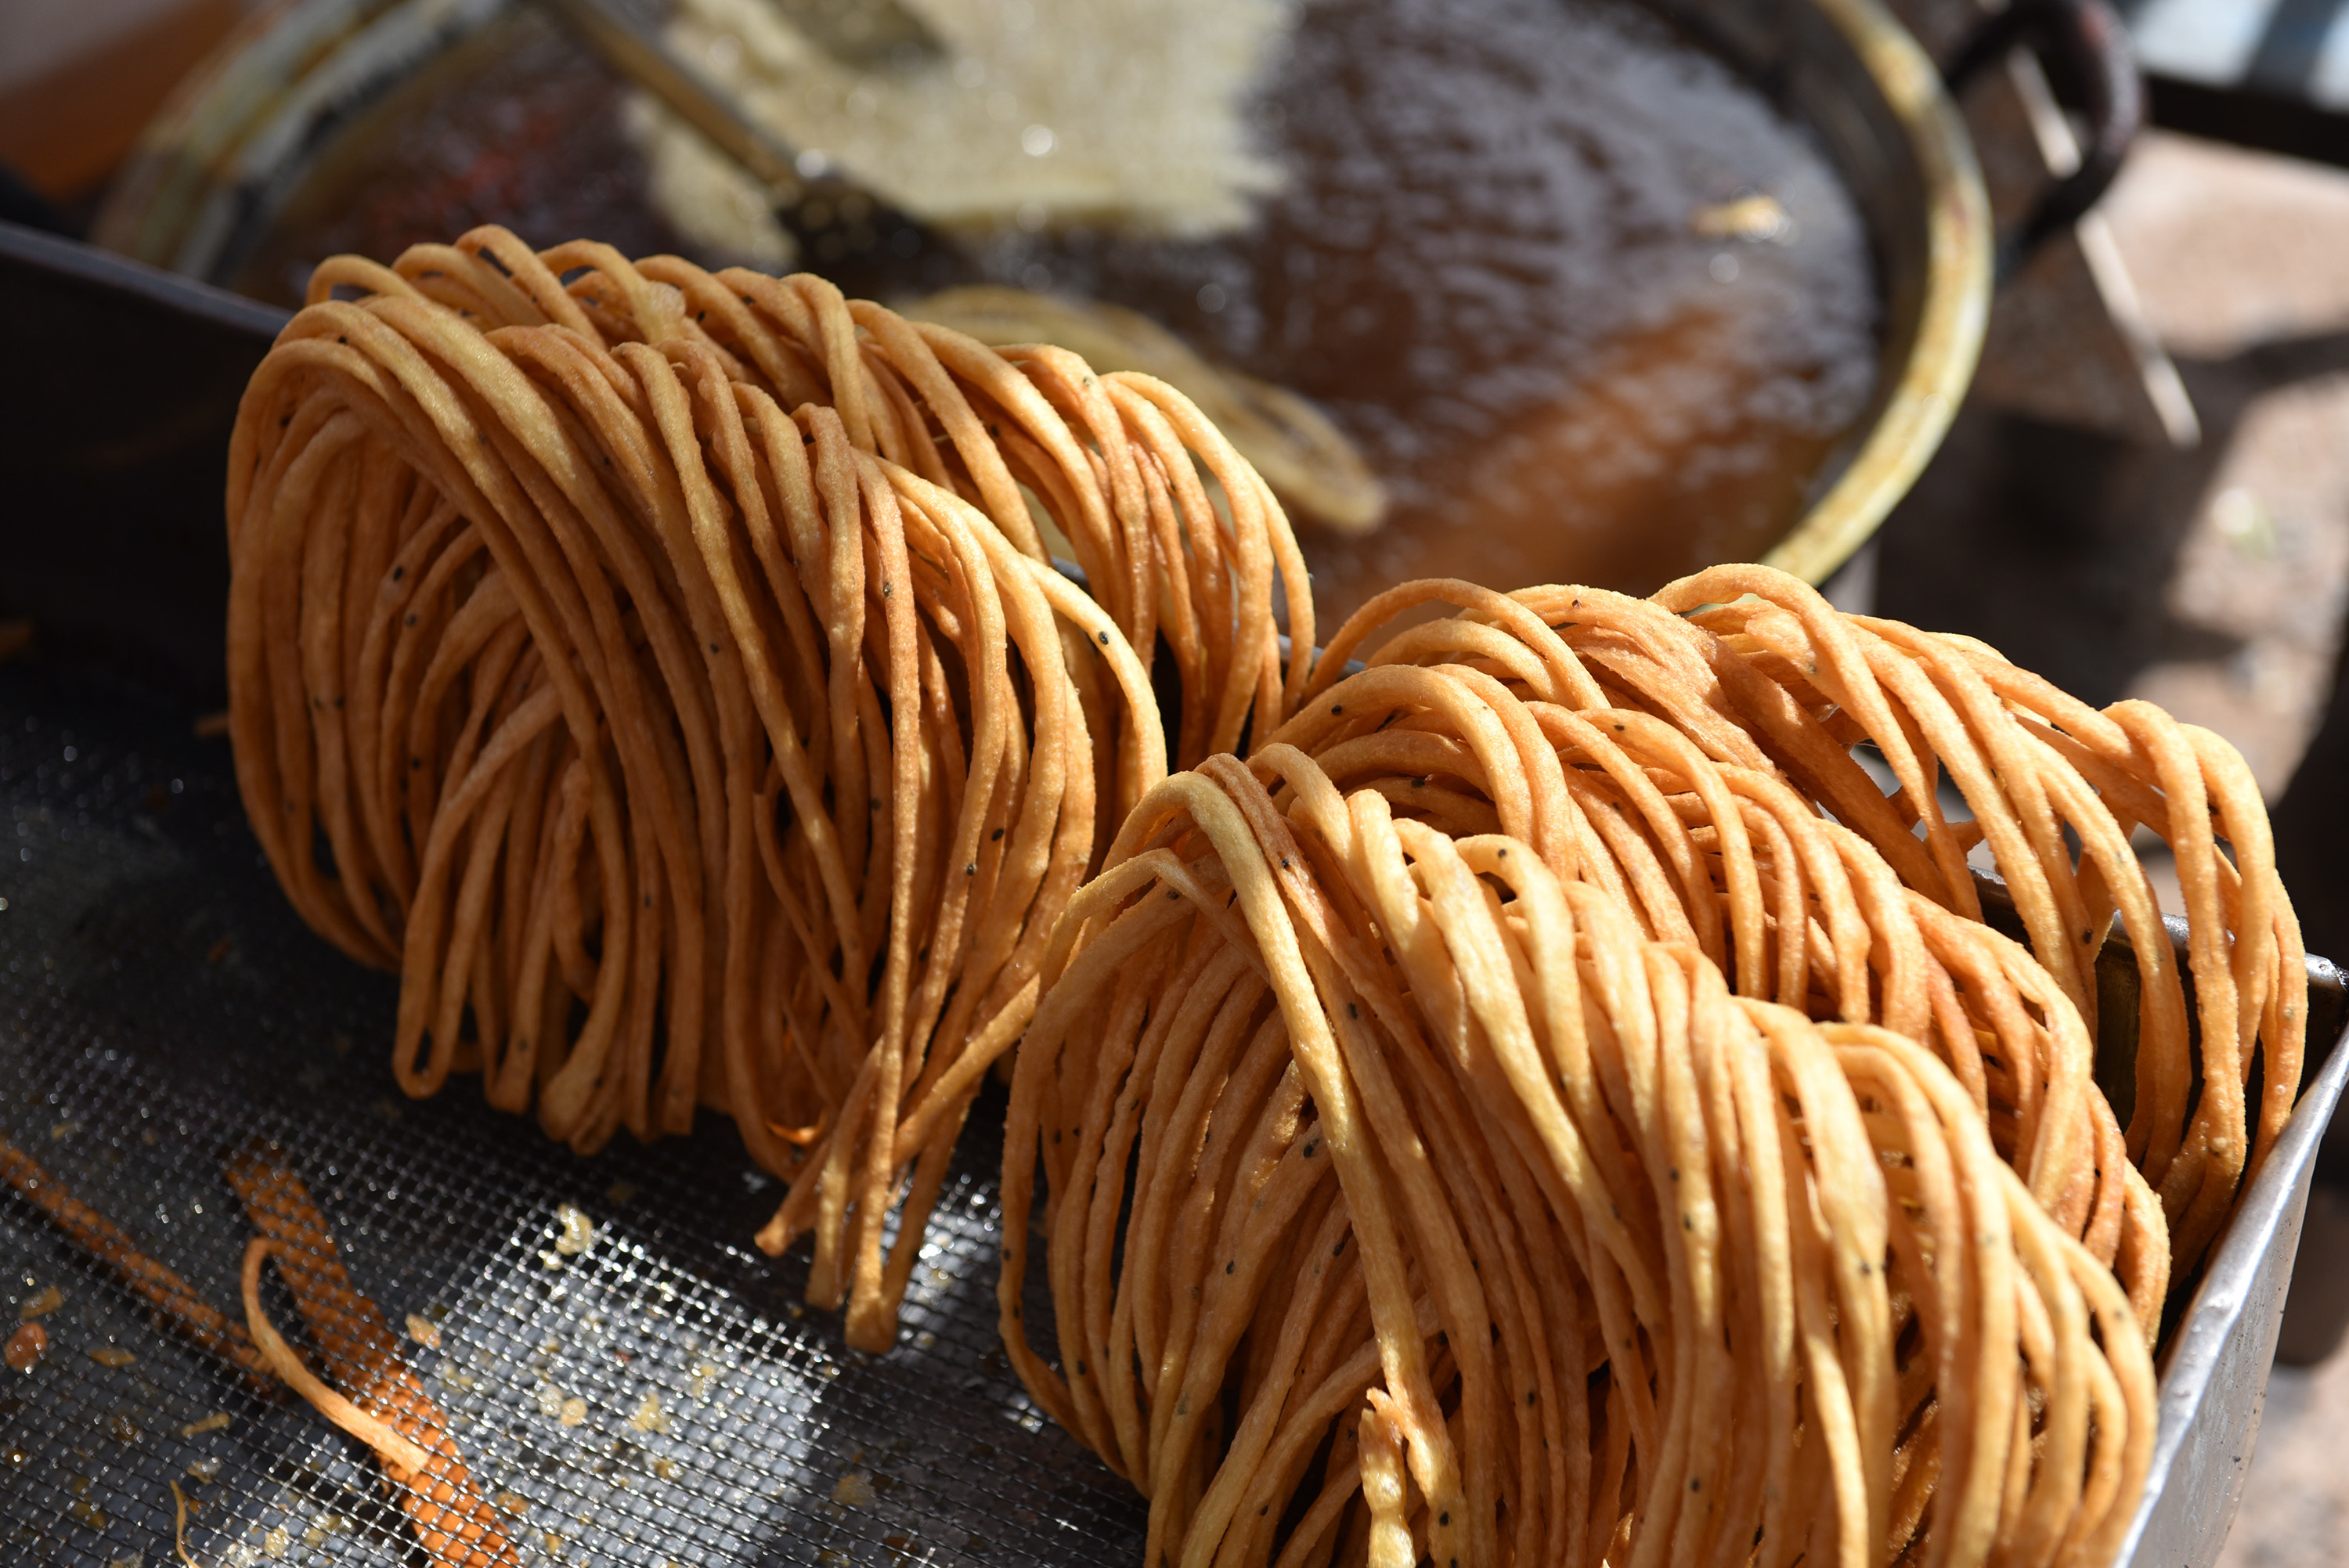 A file photo shows sanzi, or fried dough twists, which have just been cooked. /IC